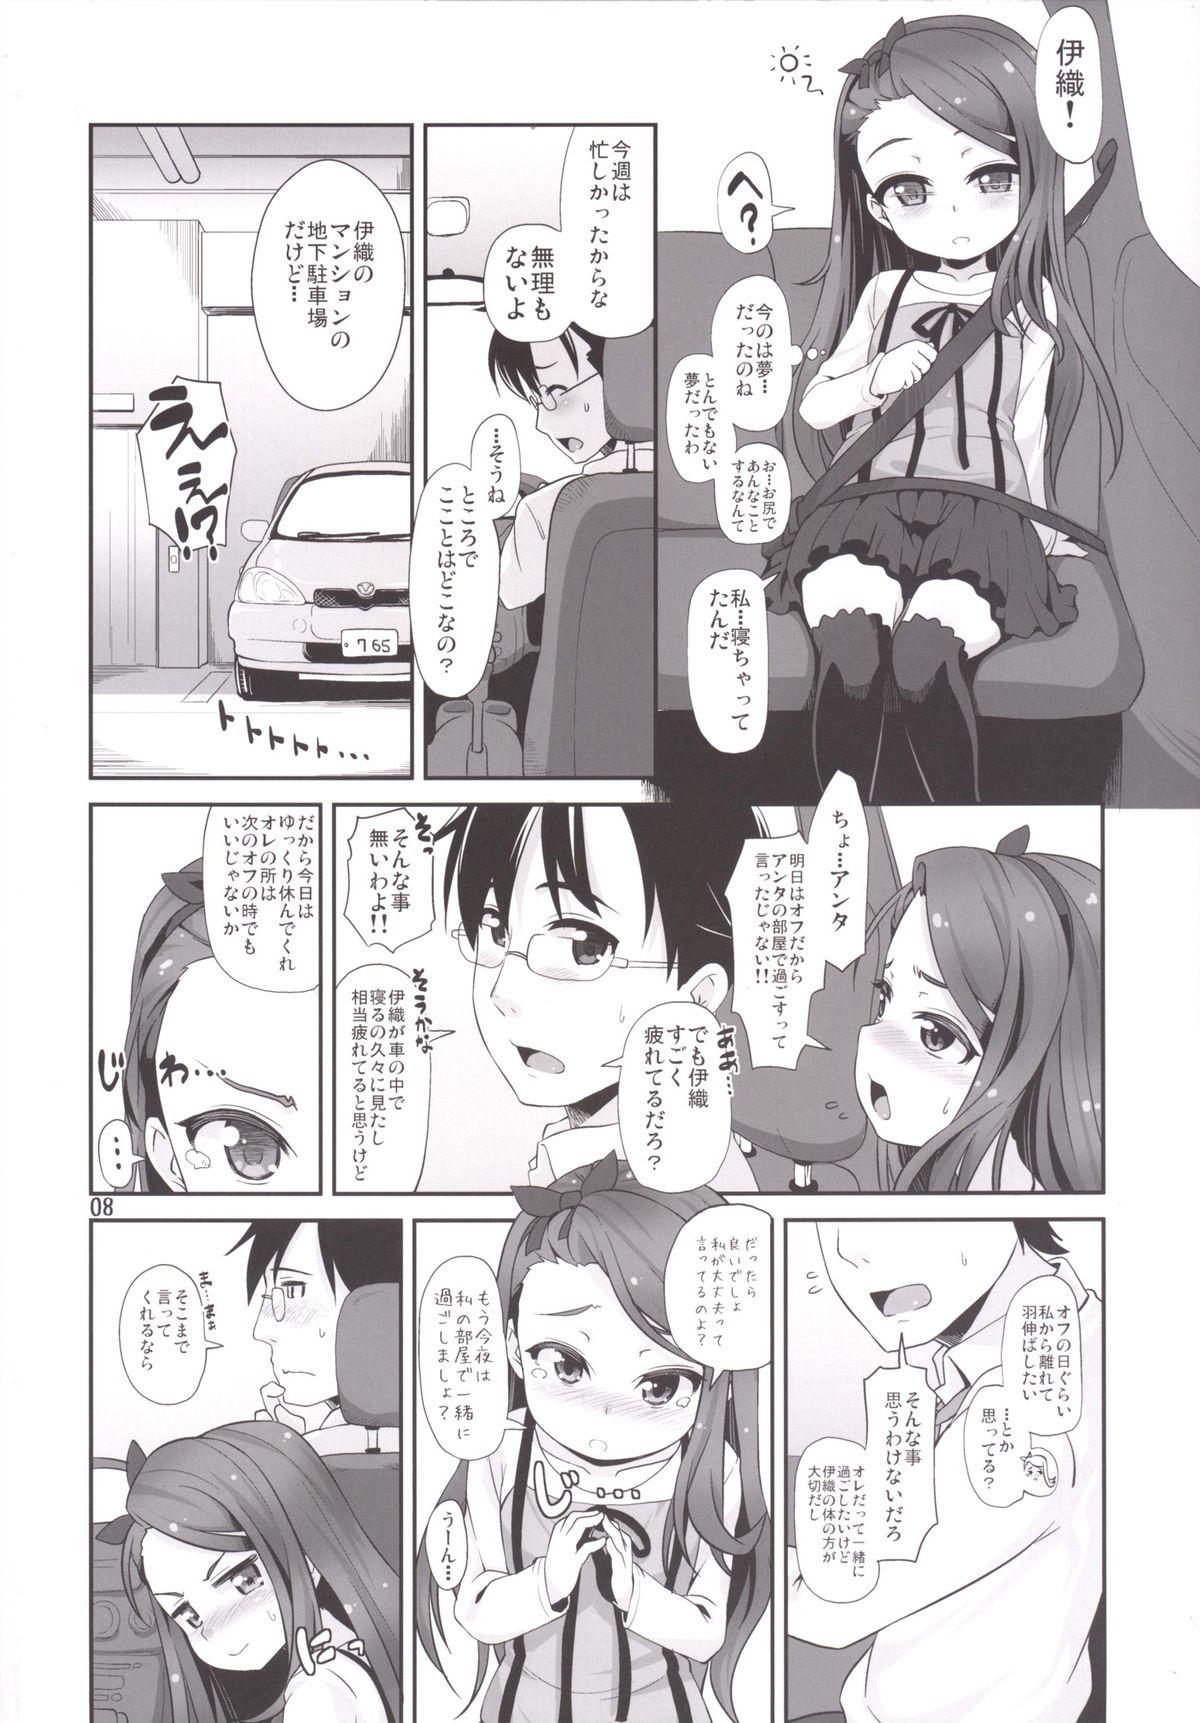 Teasing IoRIx *Dream* - The idolmaster Gaystraight - Page 7